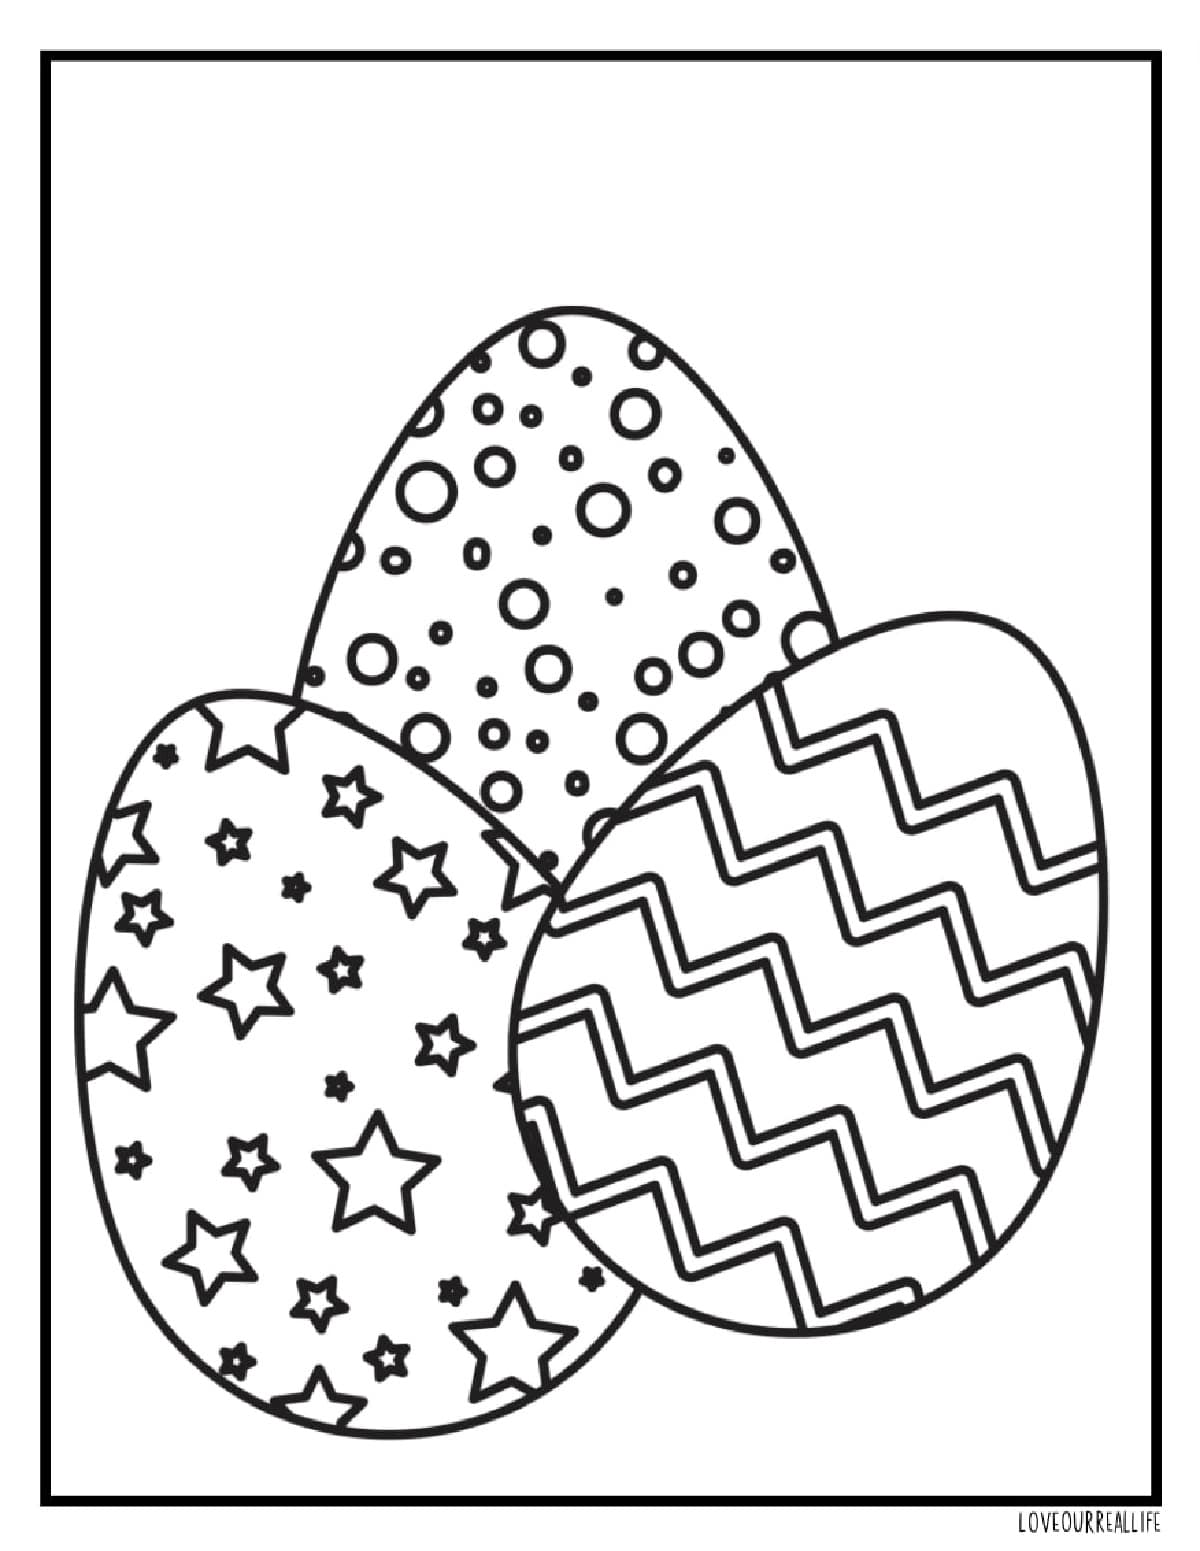 Group of three blank decorative eggs to print.